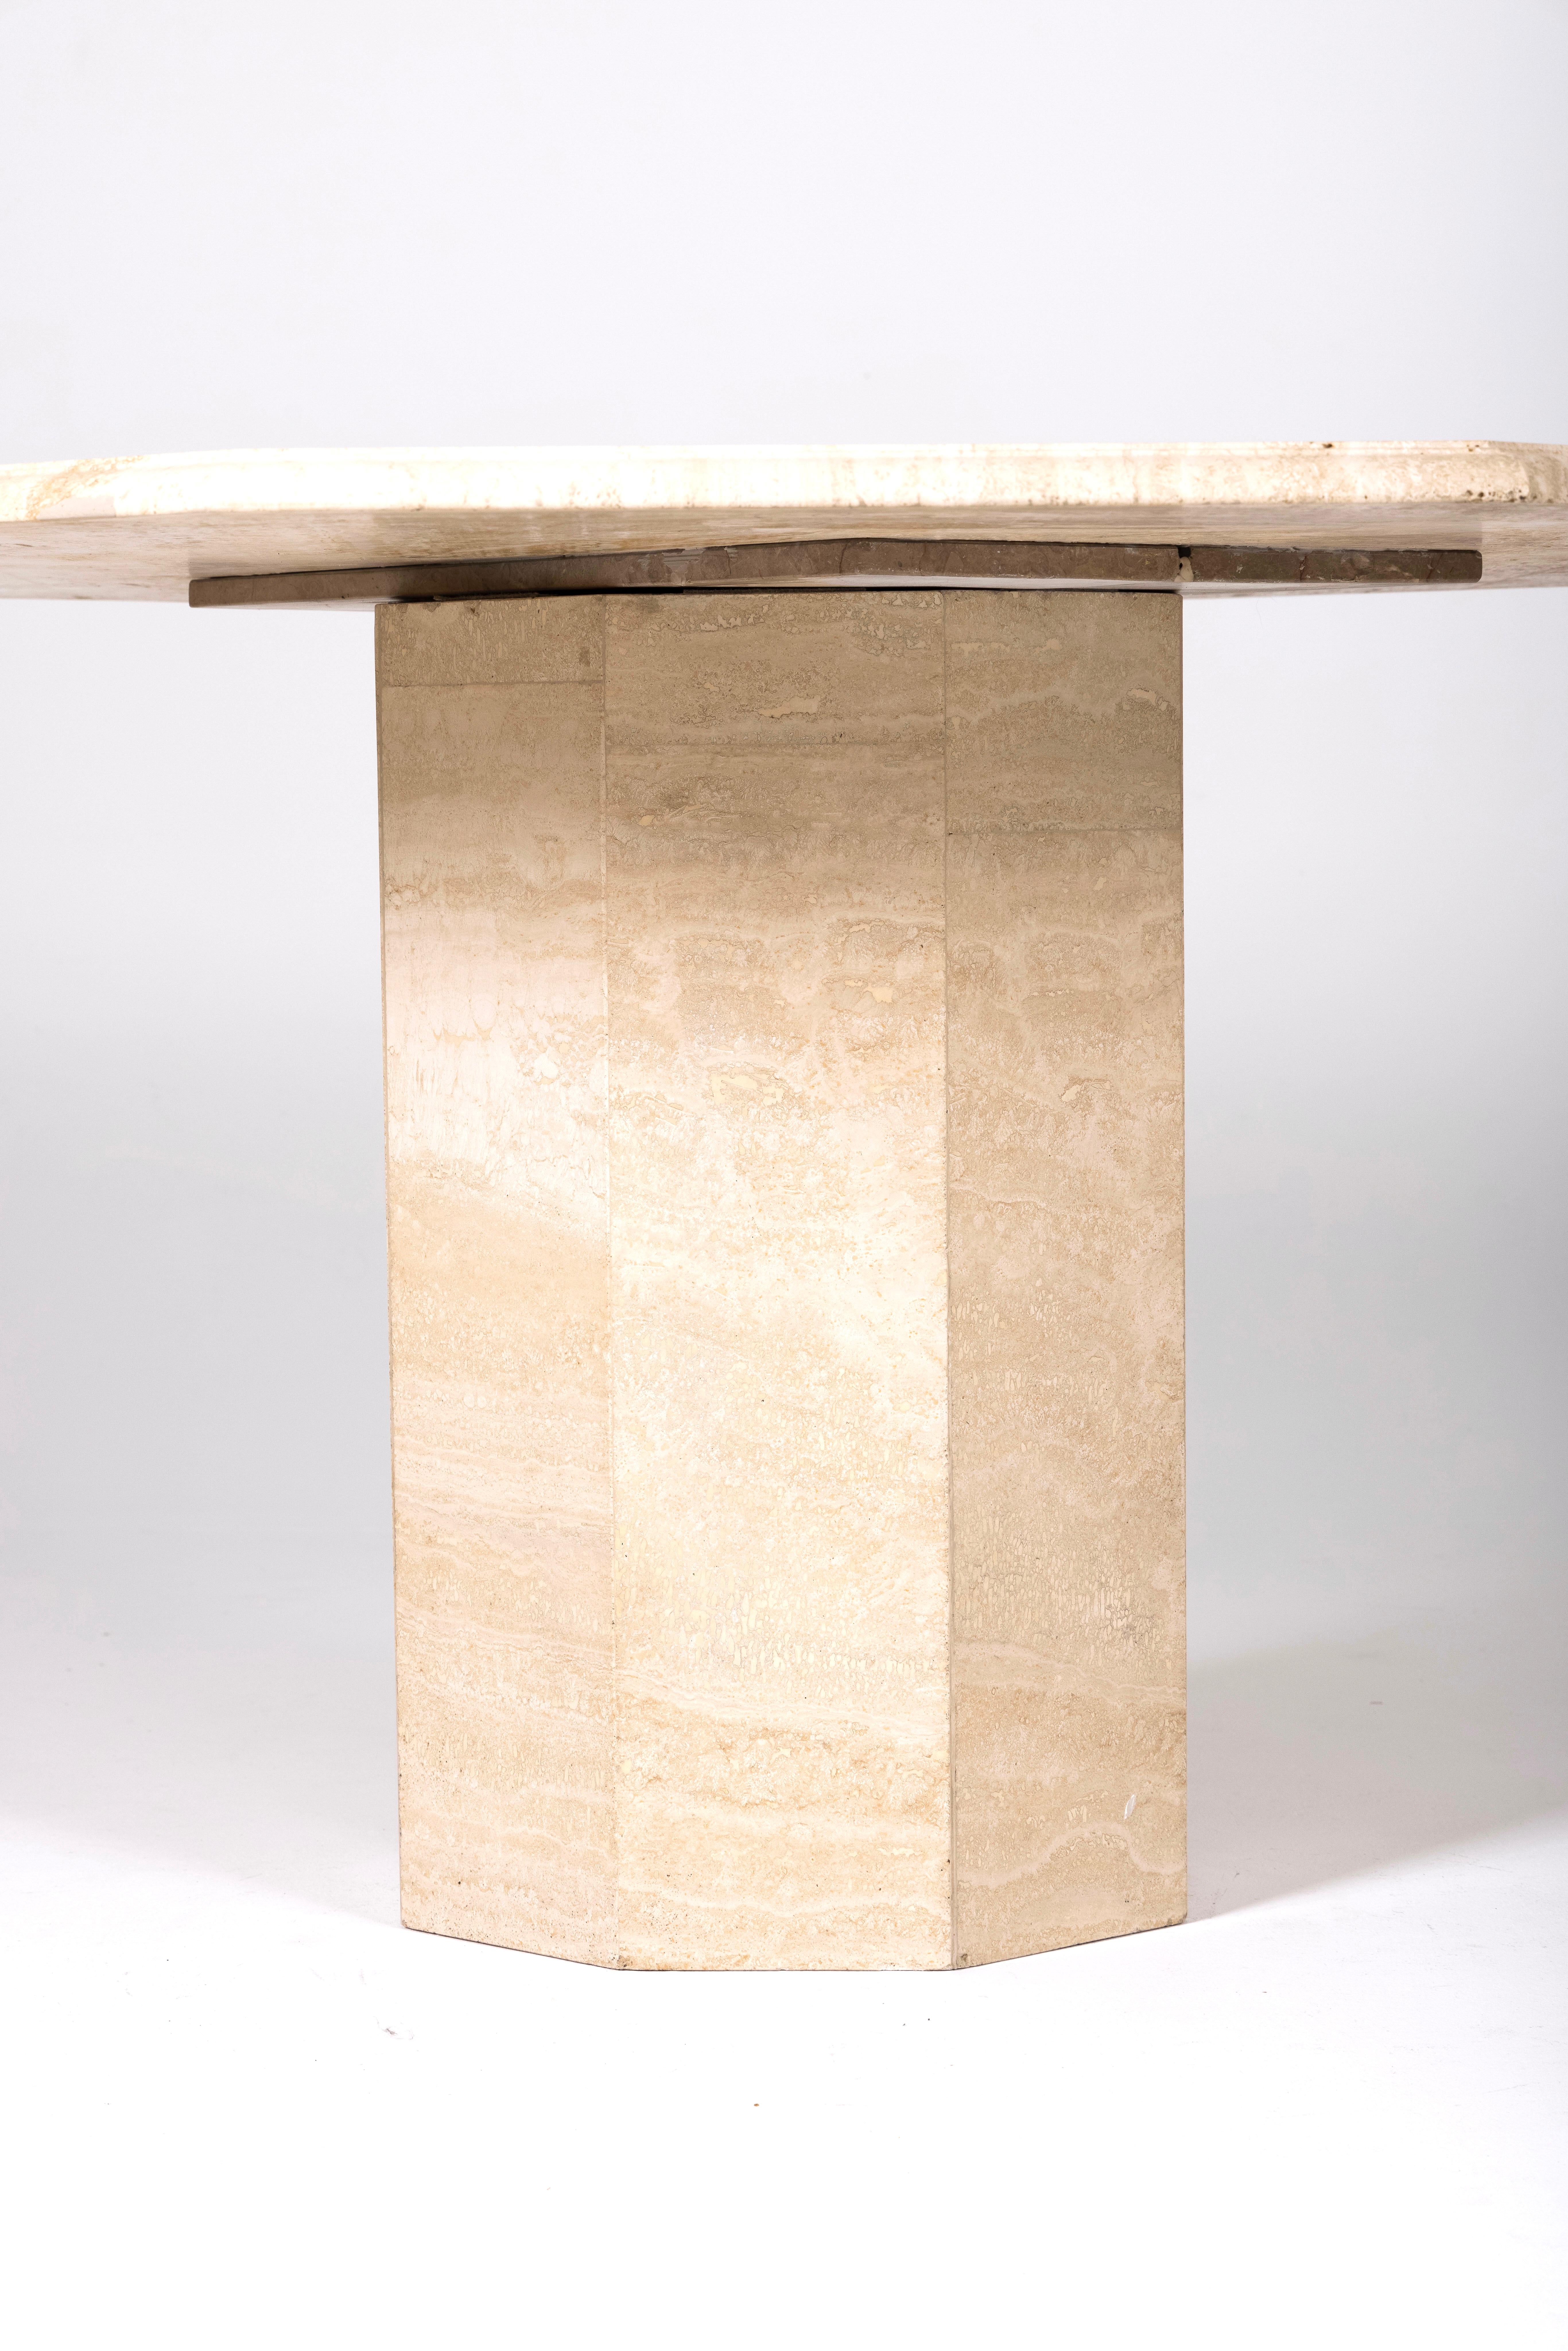 Travertine Octagonal travertine dining table. For Sale